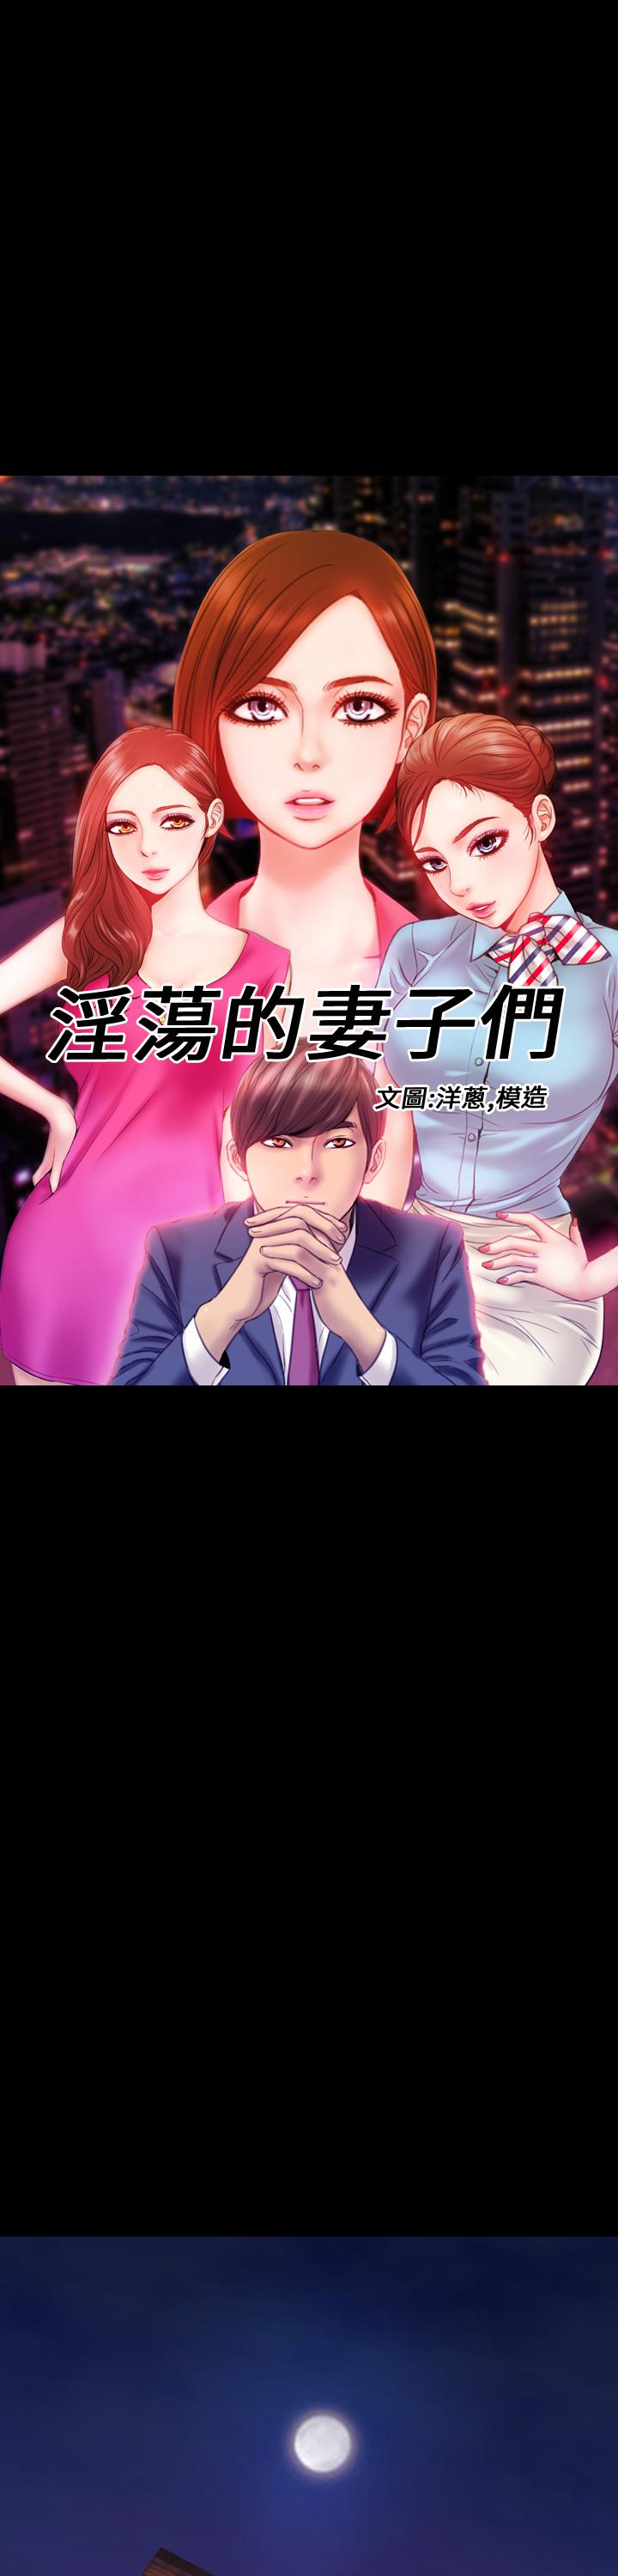 MY WIVES (淫蕩的妻子們) Ch.3 (Chinese) 0